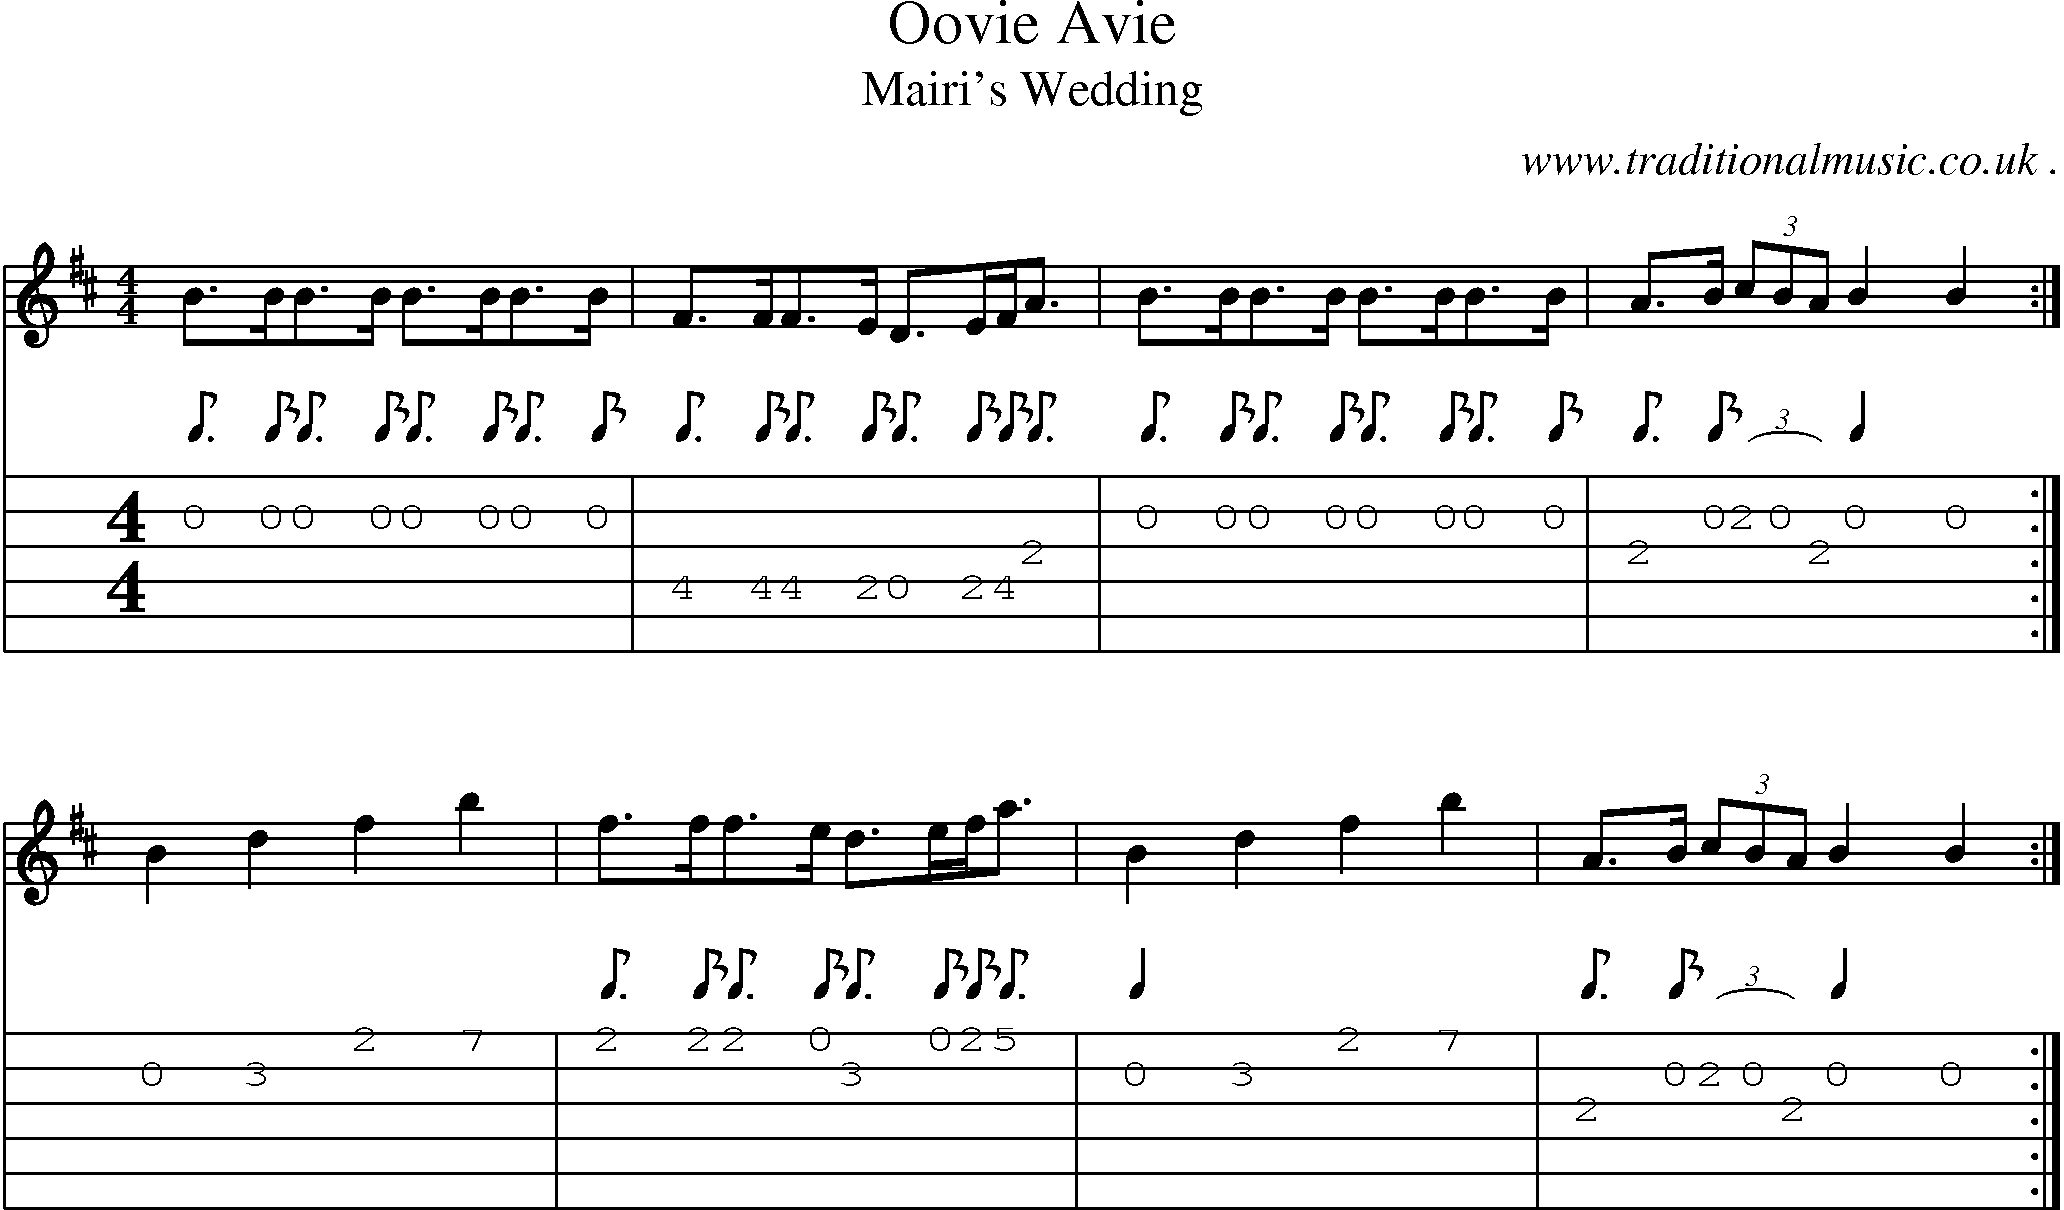 Sheet-music  score, Chords and Guitar Tabs for Oovie Avie